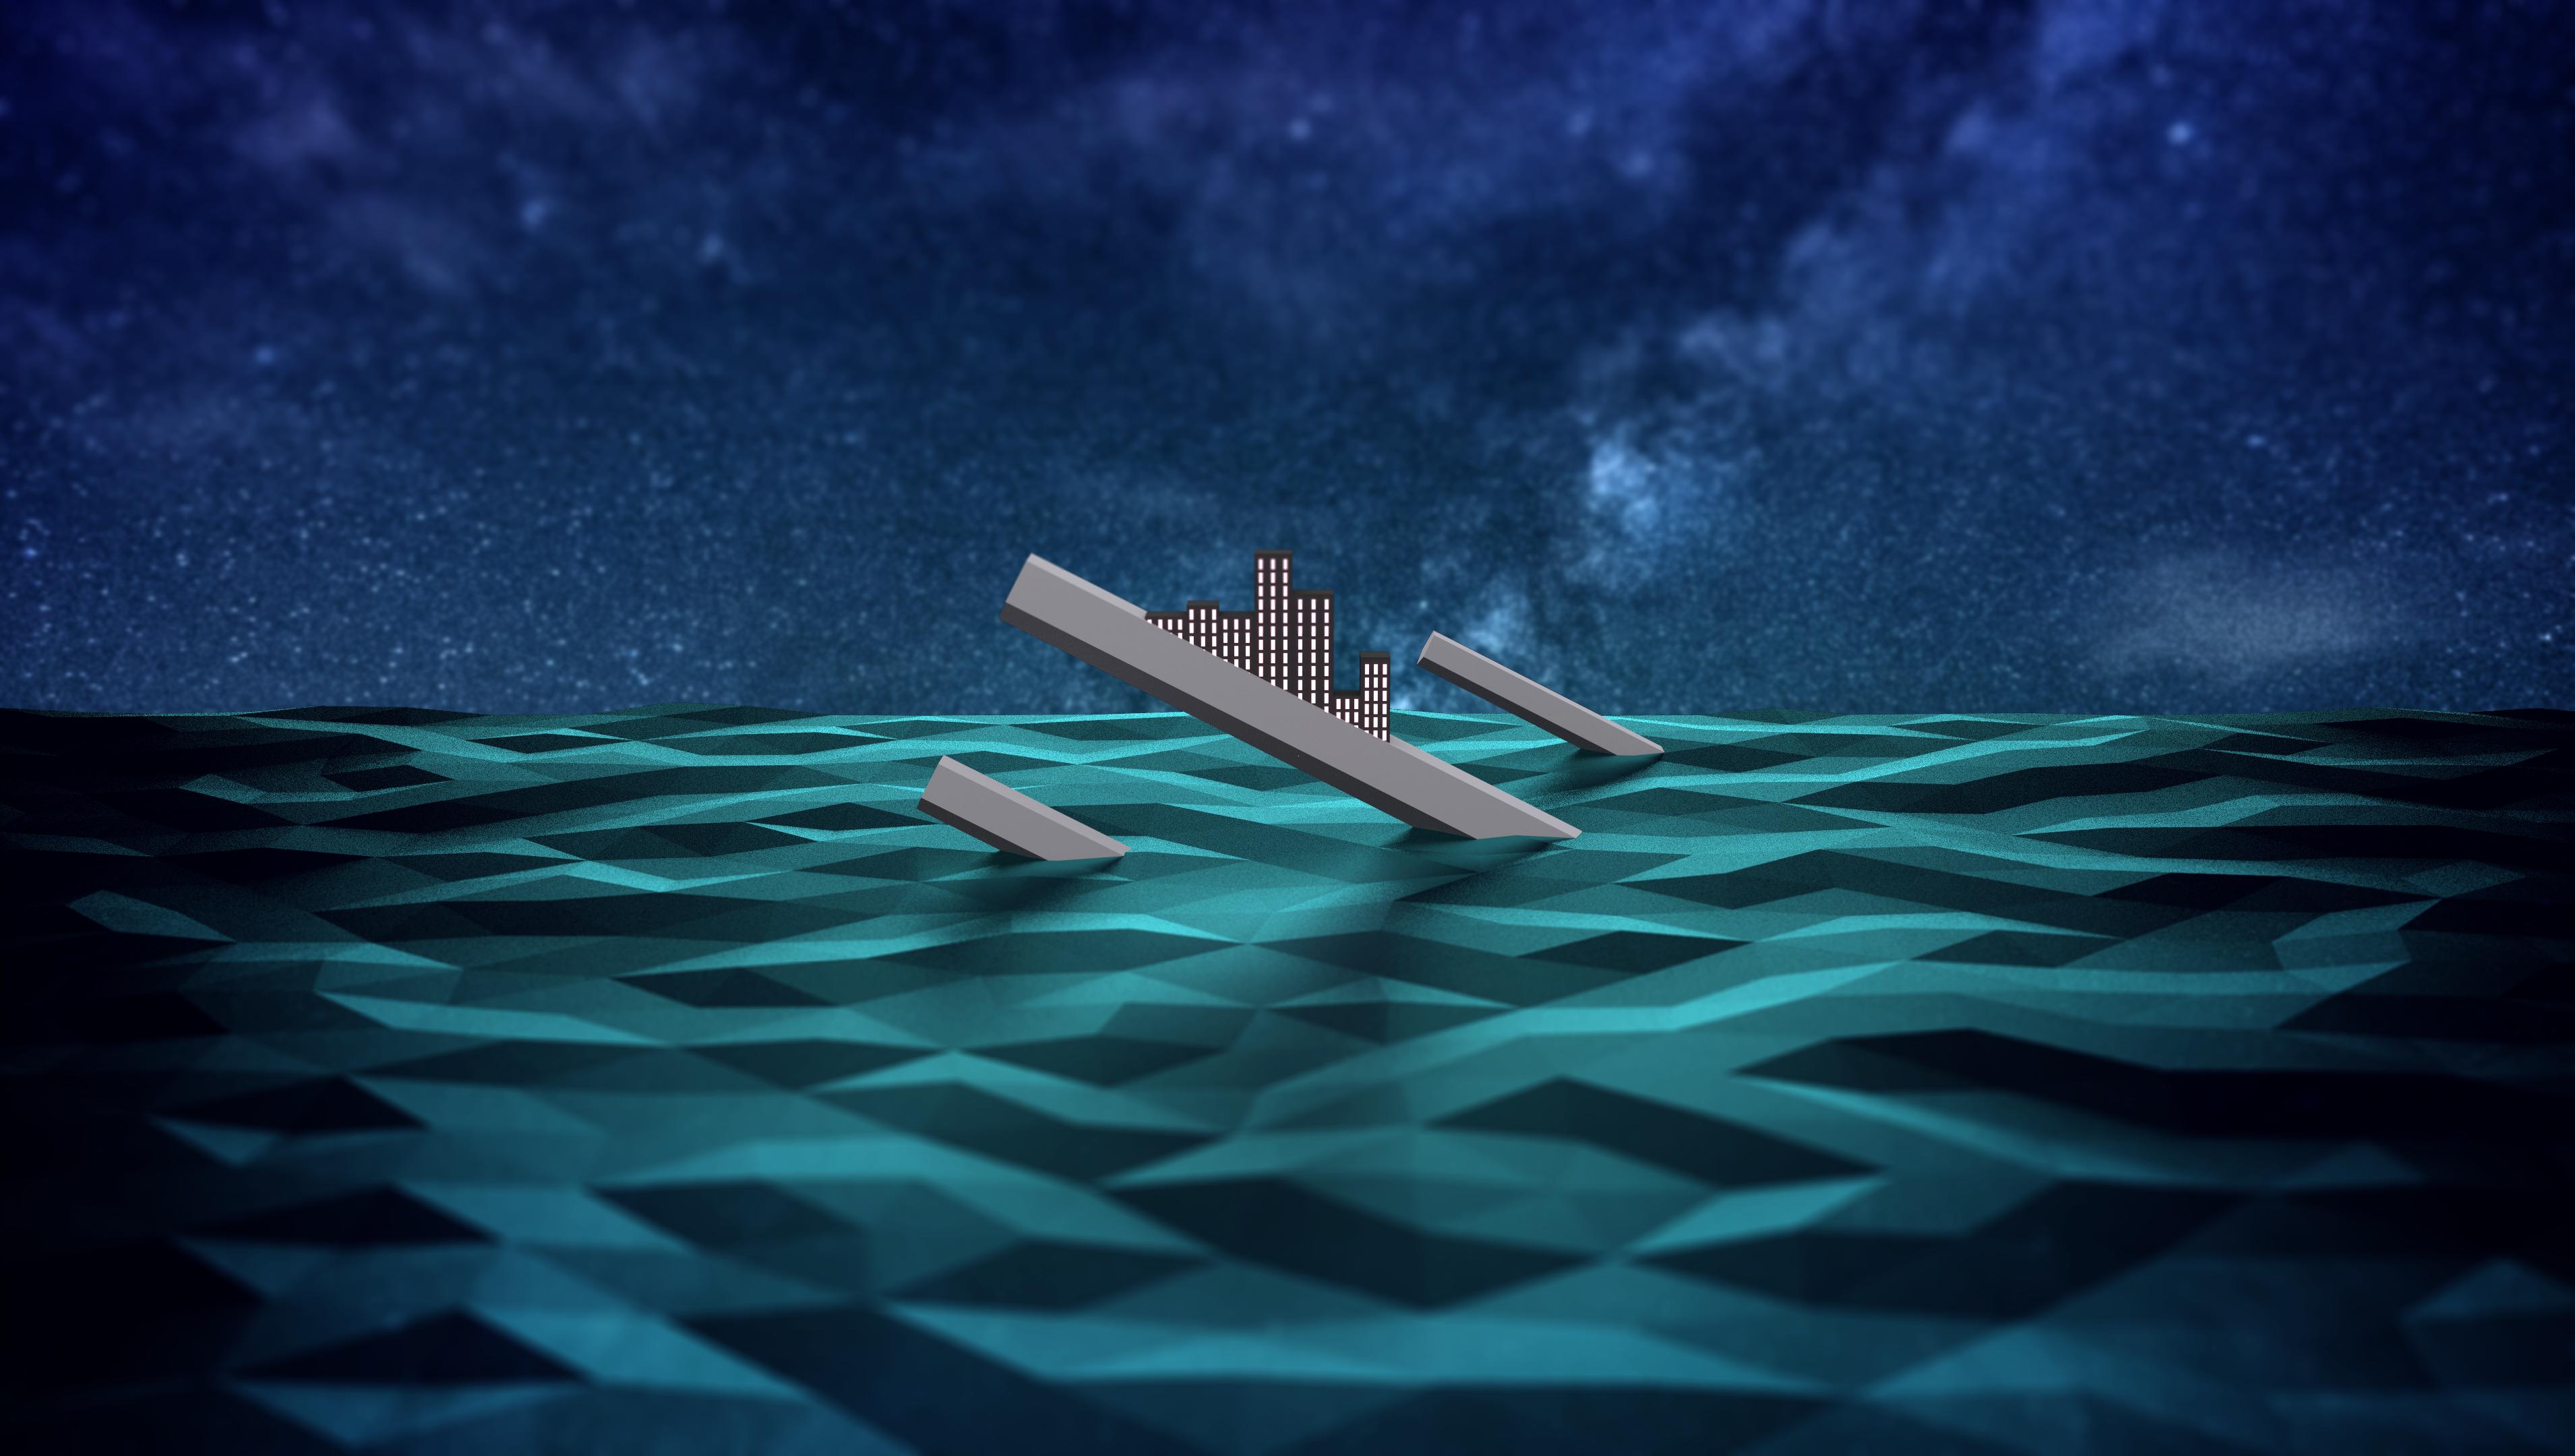 px Low Poly sea High Quality Wallpaper, High Definition Wallpaper